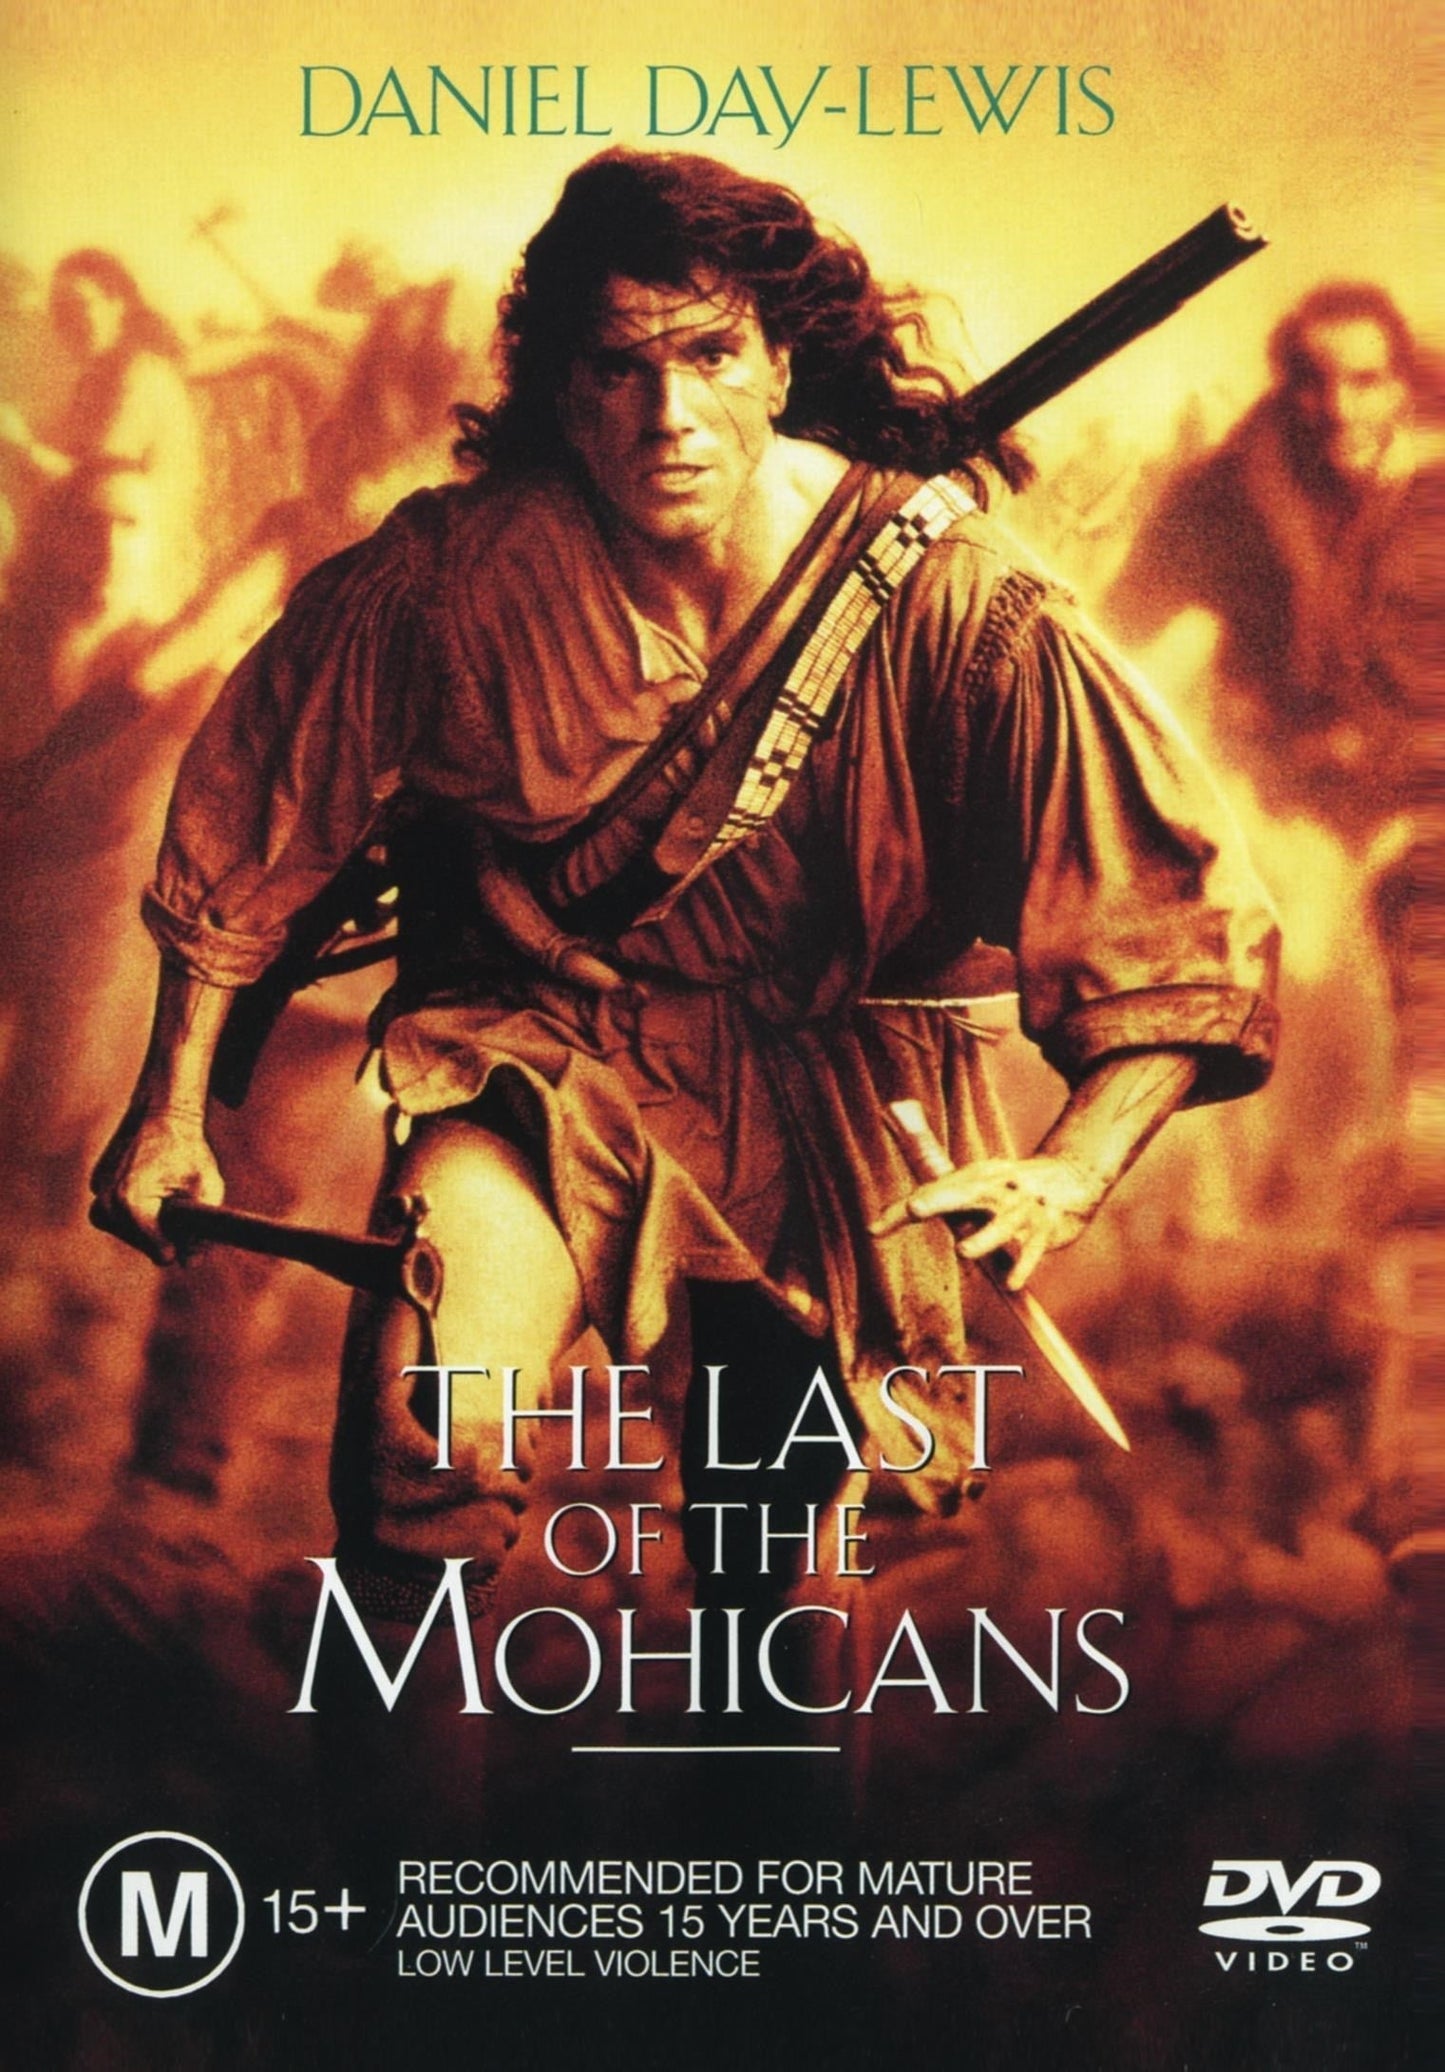 The Last of the Mohicans rareandcollectibledvds